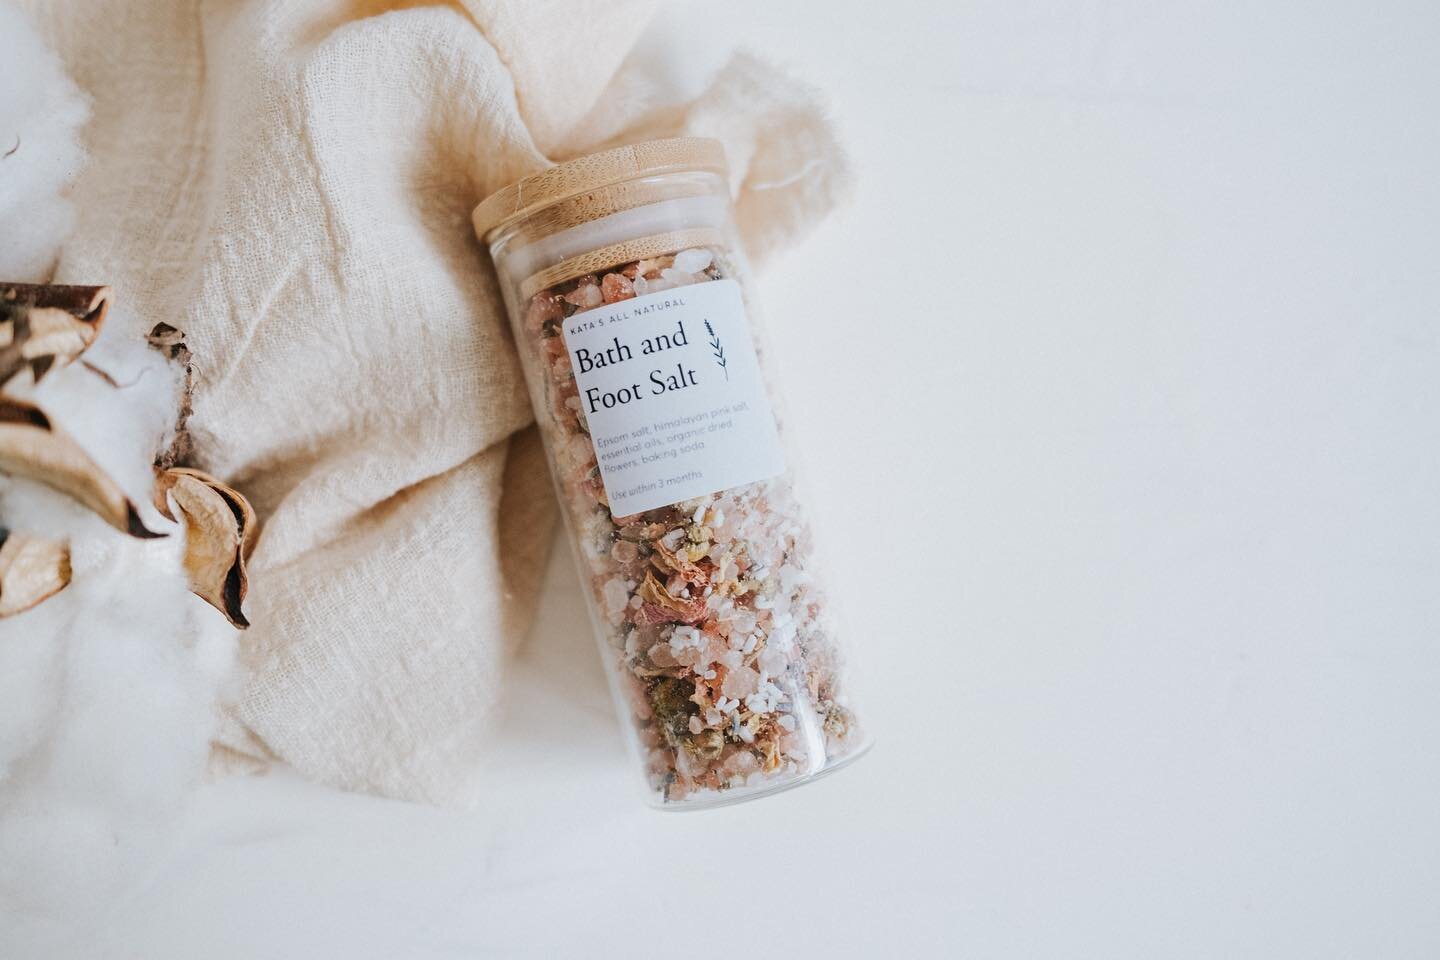 New product alert - Kata&rsquo;s Bath and Foot salt, a mix of epsom salt, beuautiful petals, and essential oil to take you to the relax zone 🧘&zwj;♀️ Add this to any hampers 💕